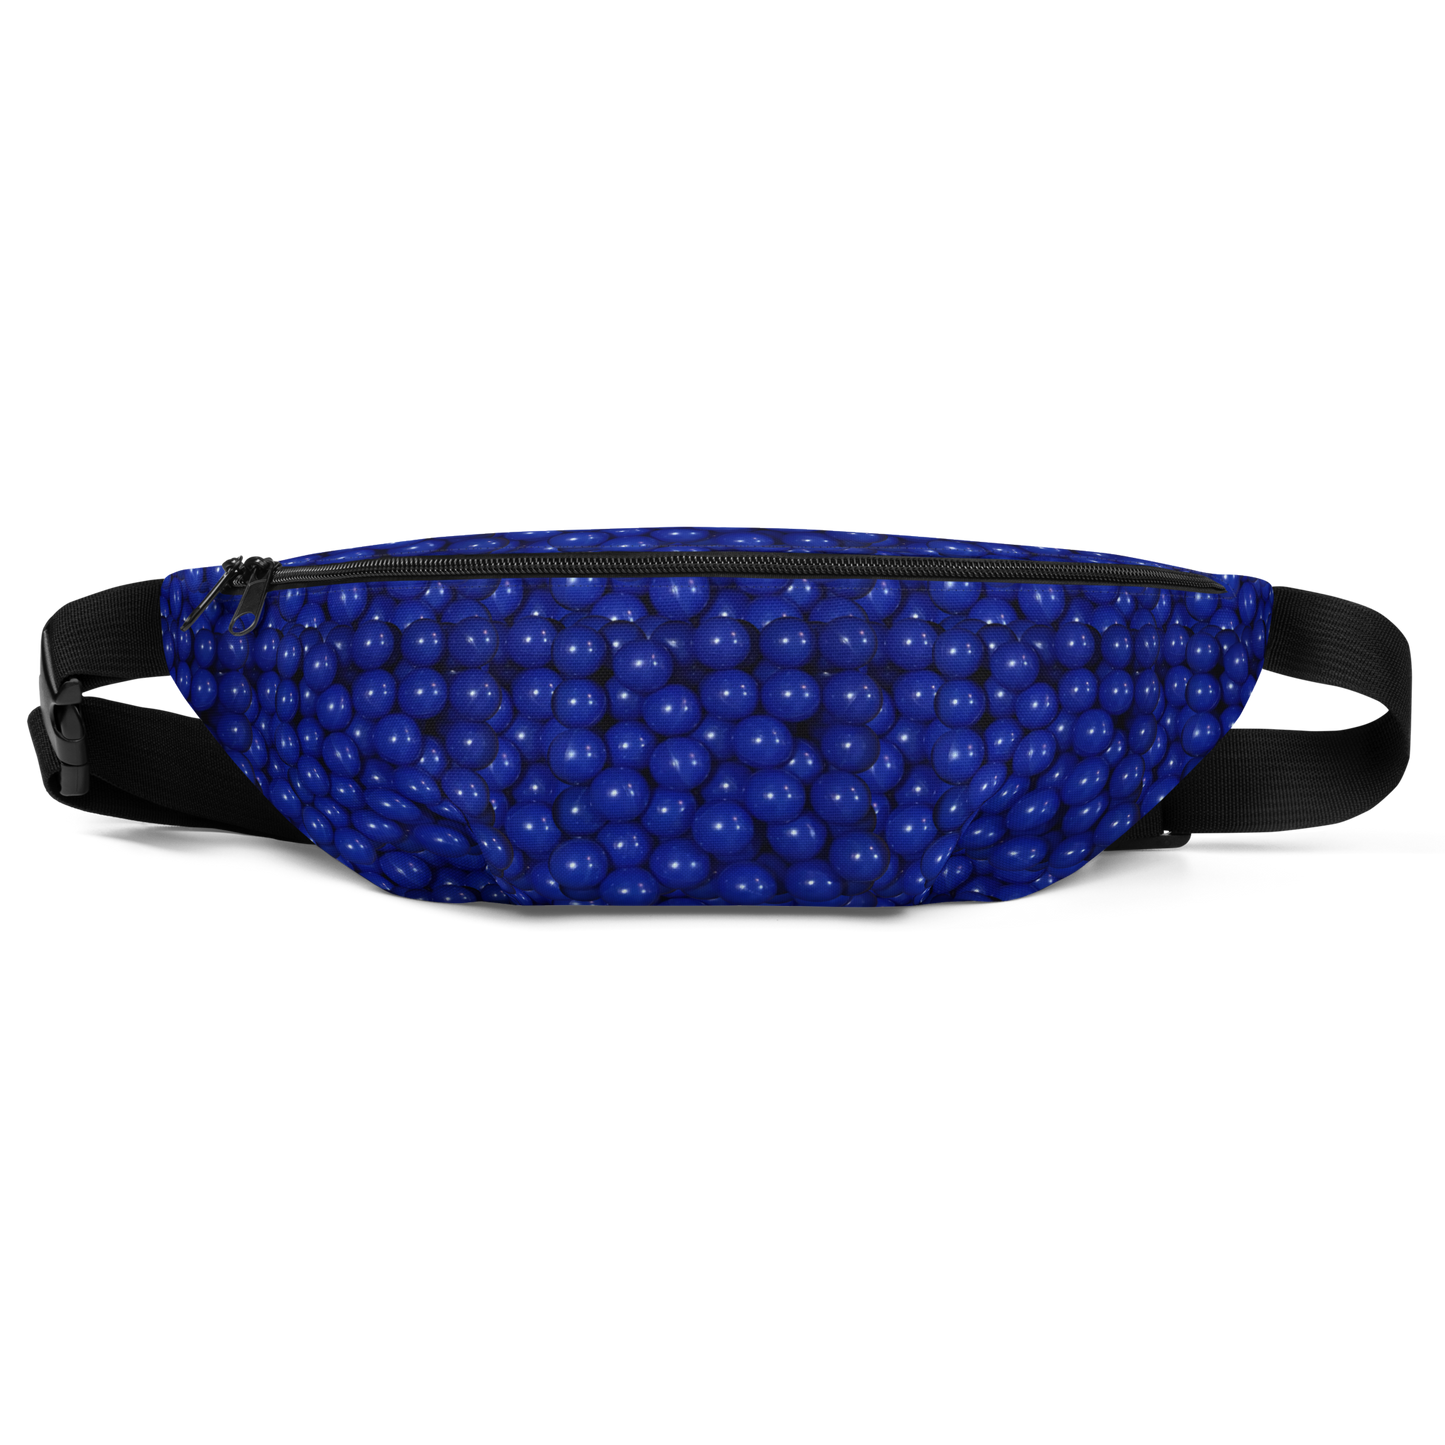 Ball Pit in Blue Fanny Pack